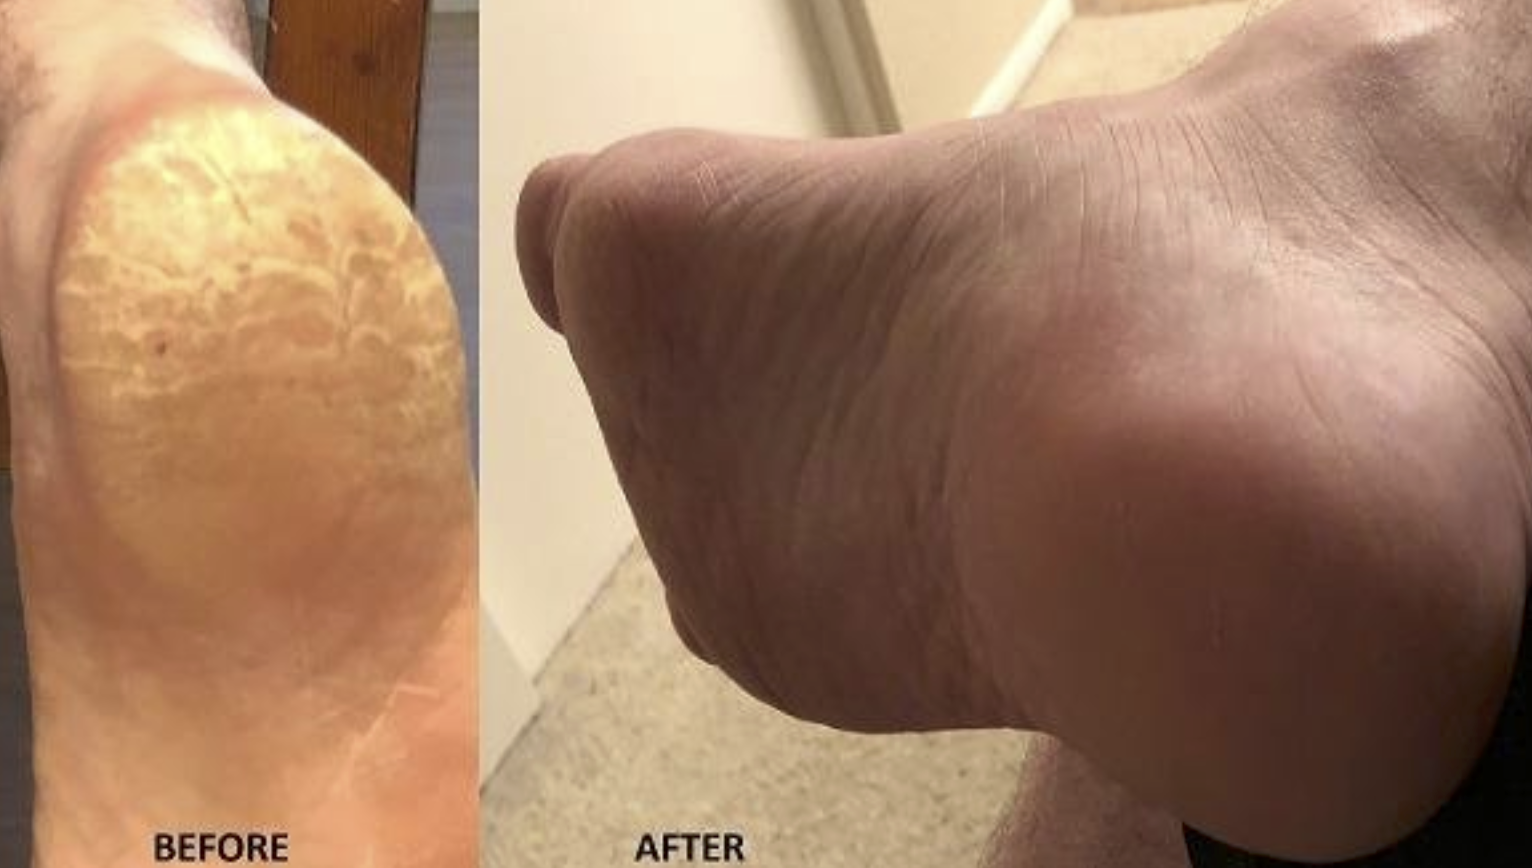 the left said shows a foot with cracks and calluses all over it and the right side shows the same reviewer&#x27;s foot looking completely smooth